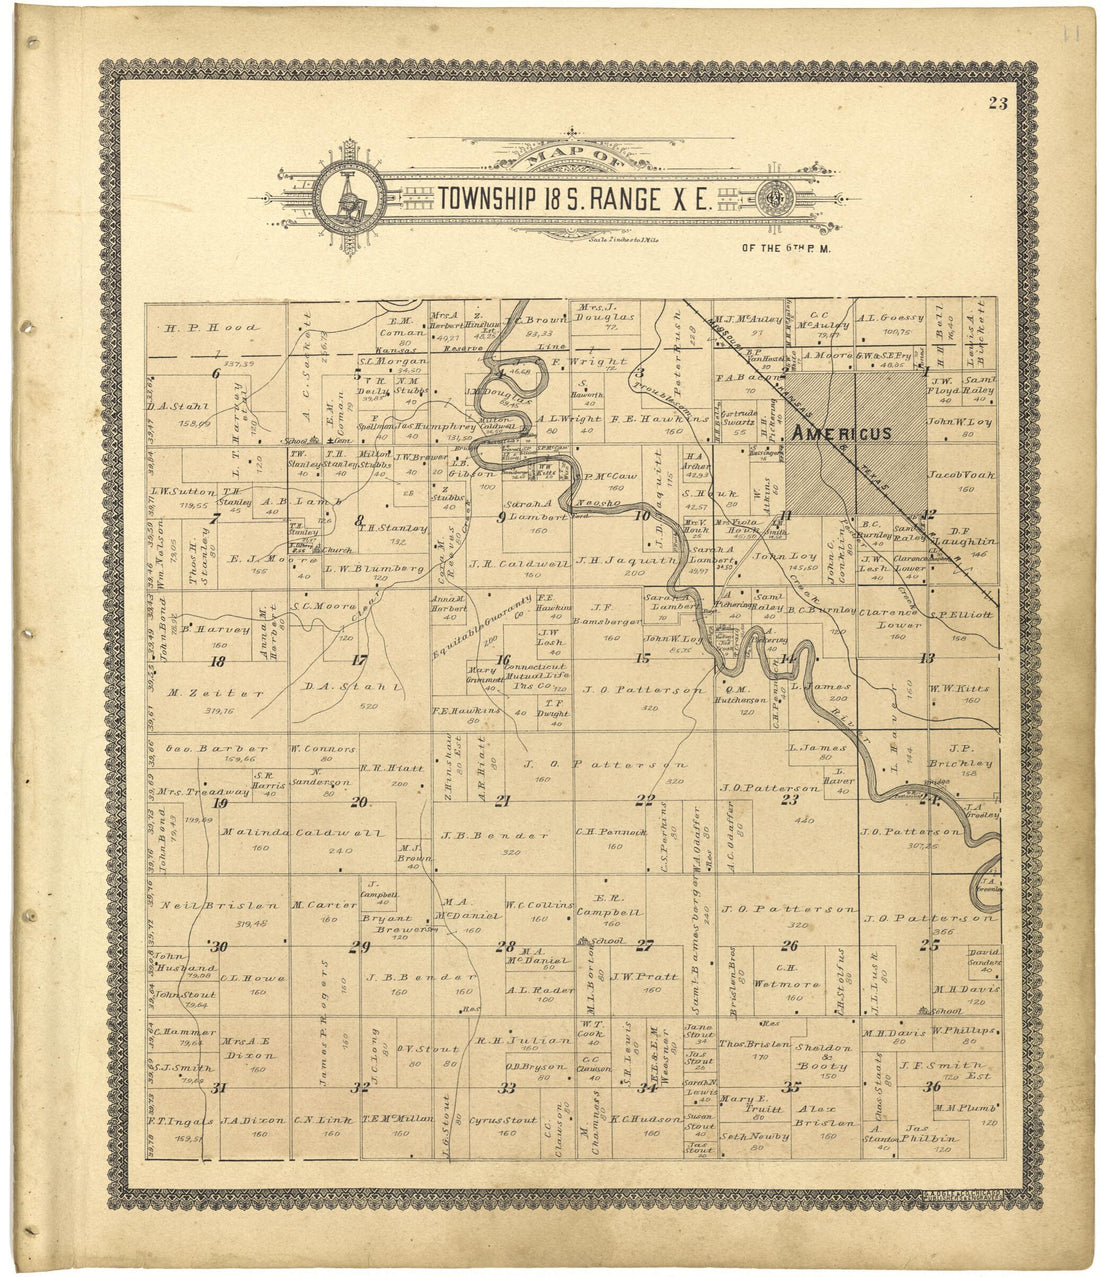 This old map of Map of Township 18 S. Range X E. from Standard Atlas of Lyon County, Kansas from 1901 was created by  Geo. A. Ogle &amp; Co in 1901